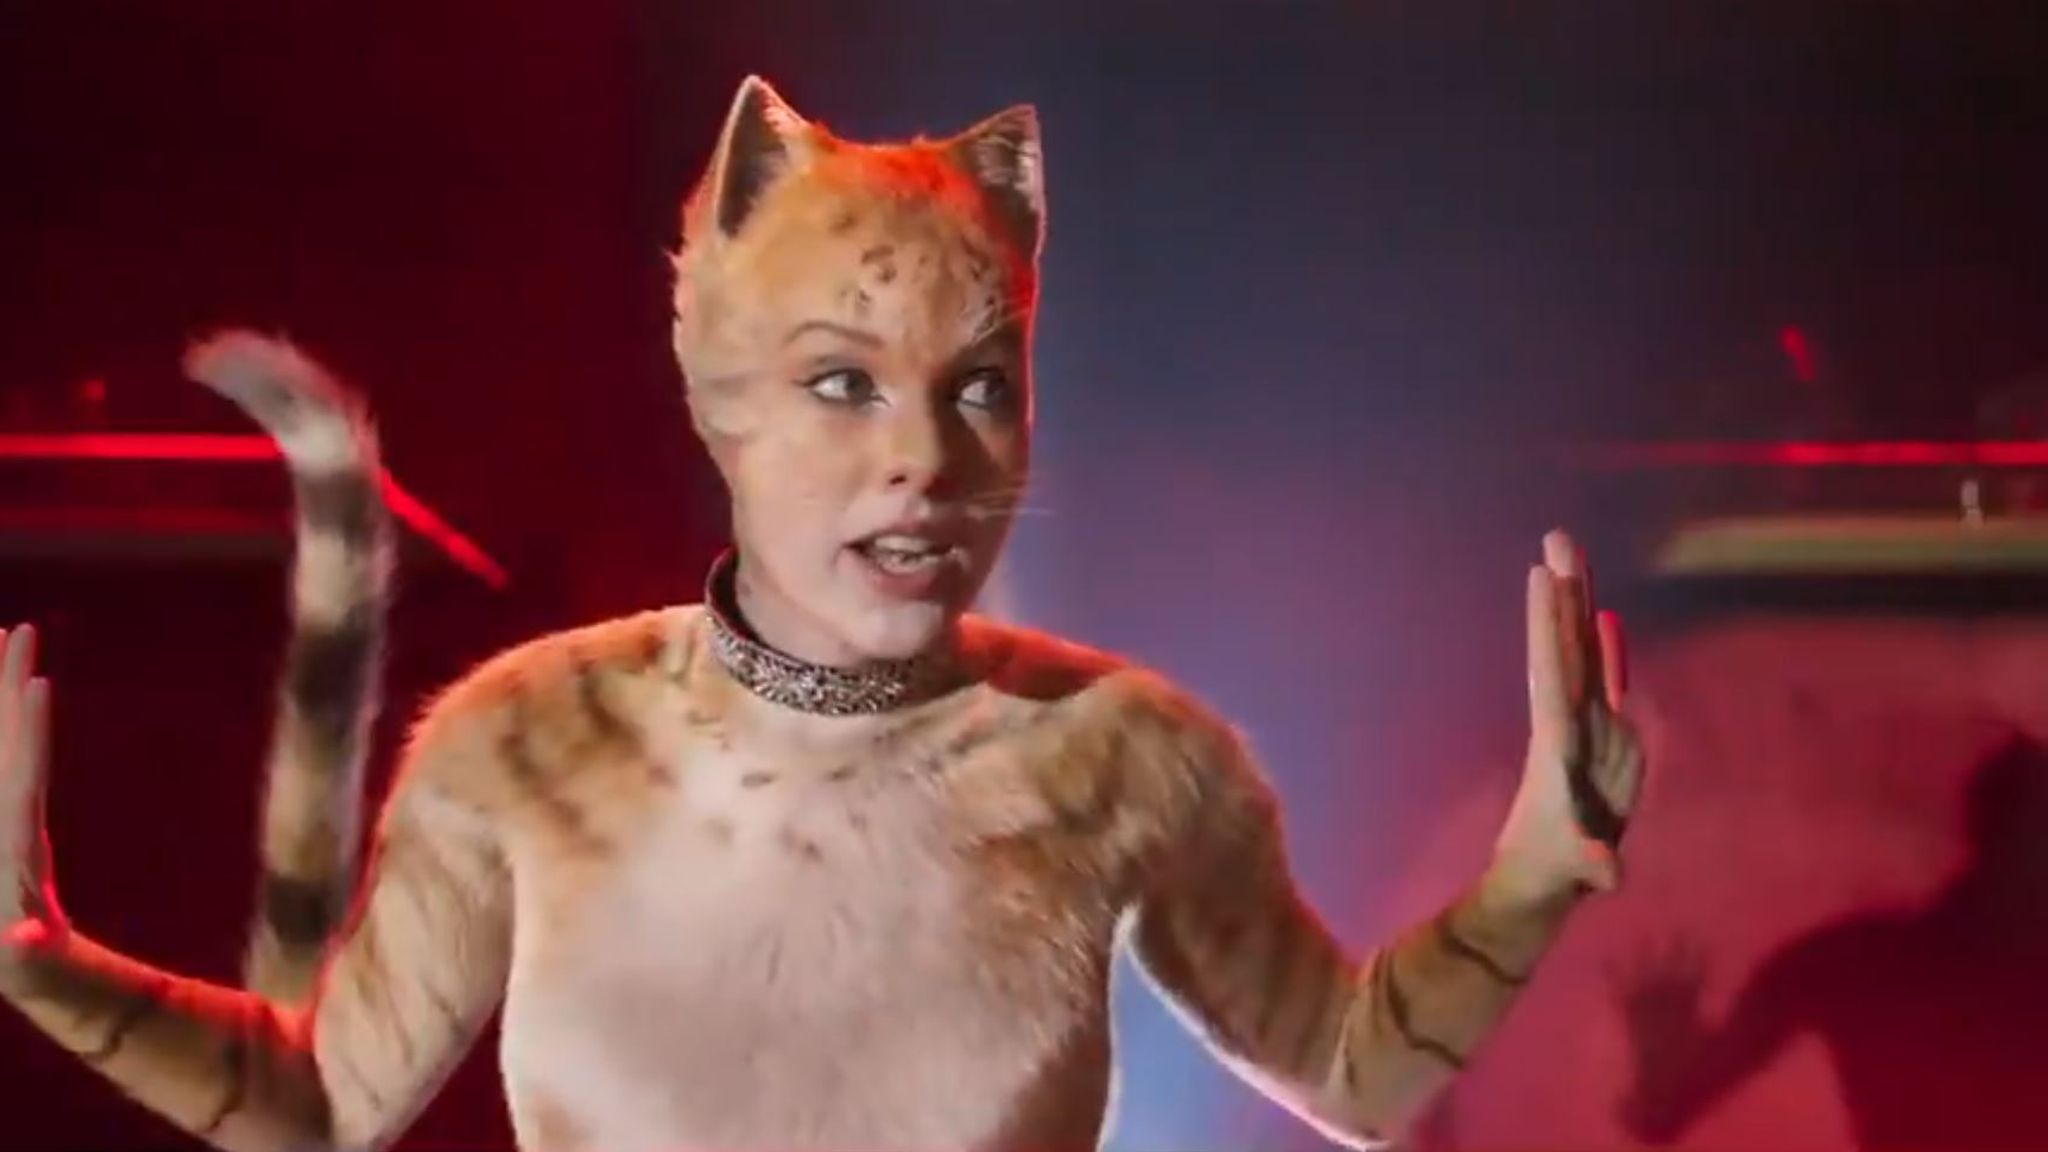 Nude Idris Elba Stars In New Trailer For Cats Movie Ents And Arts